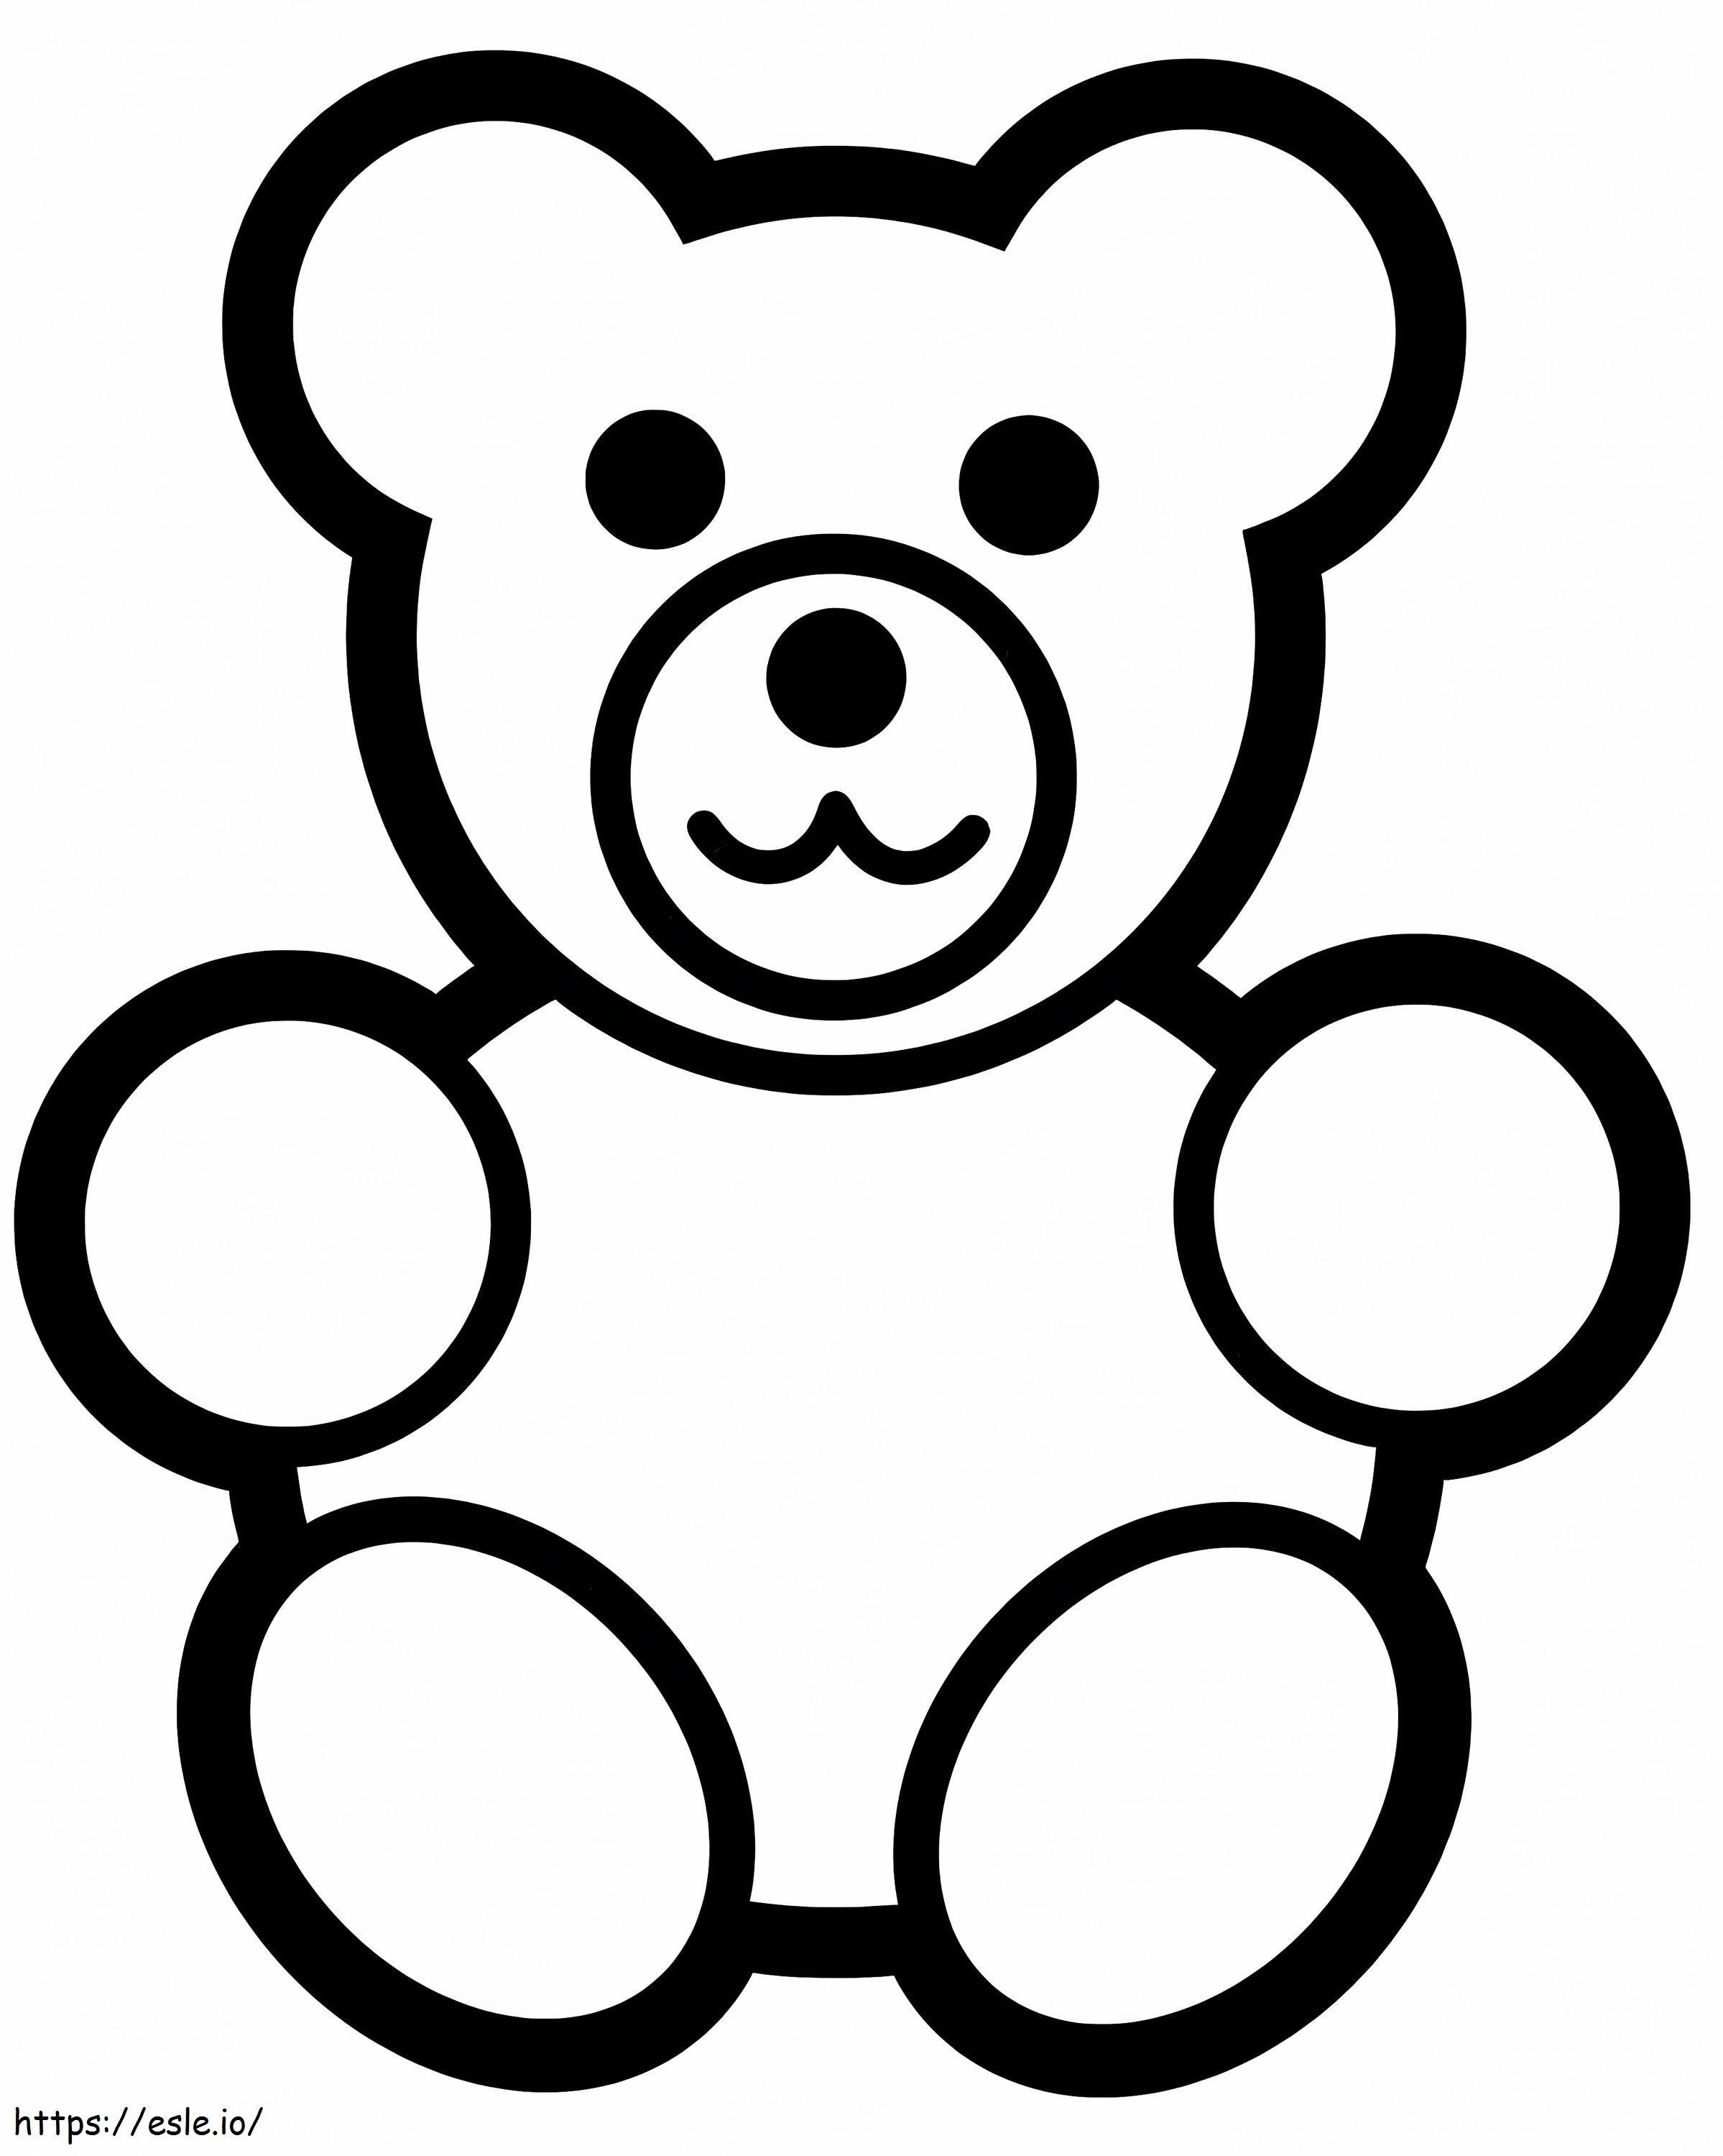 Easy Teddy coloring page